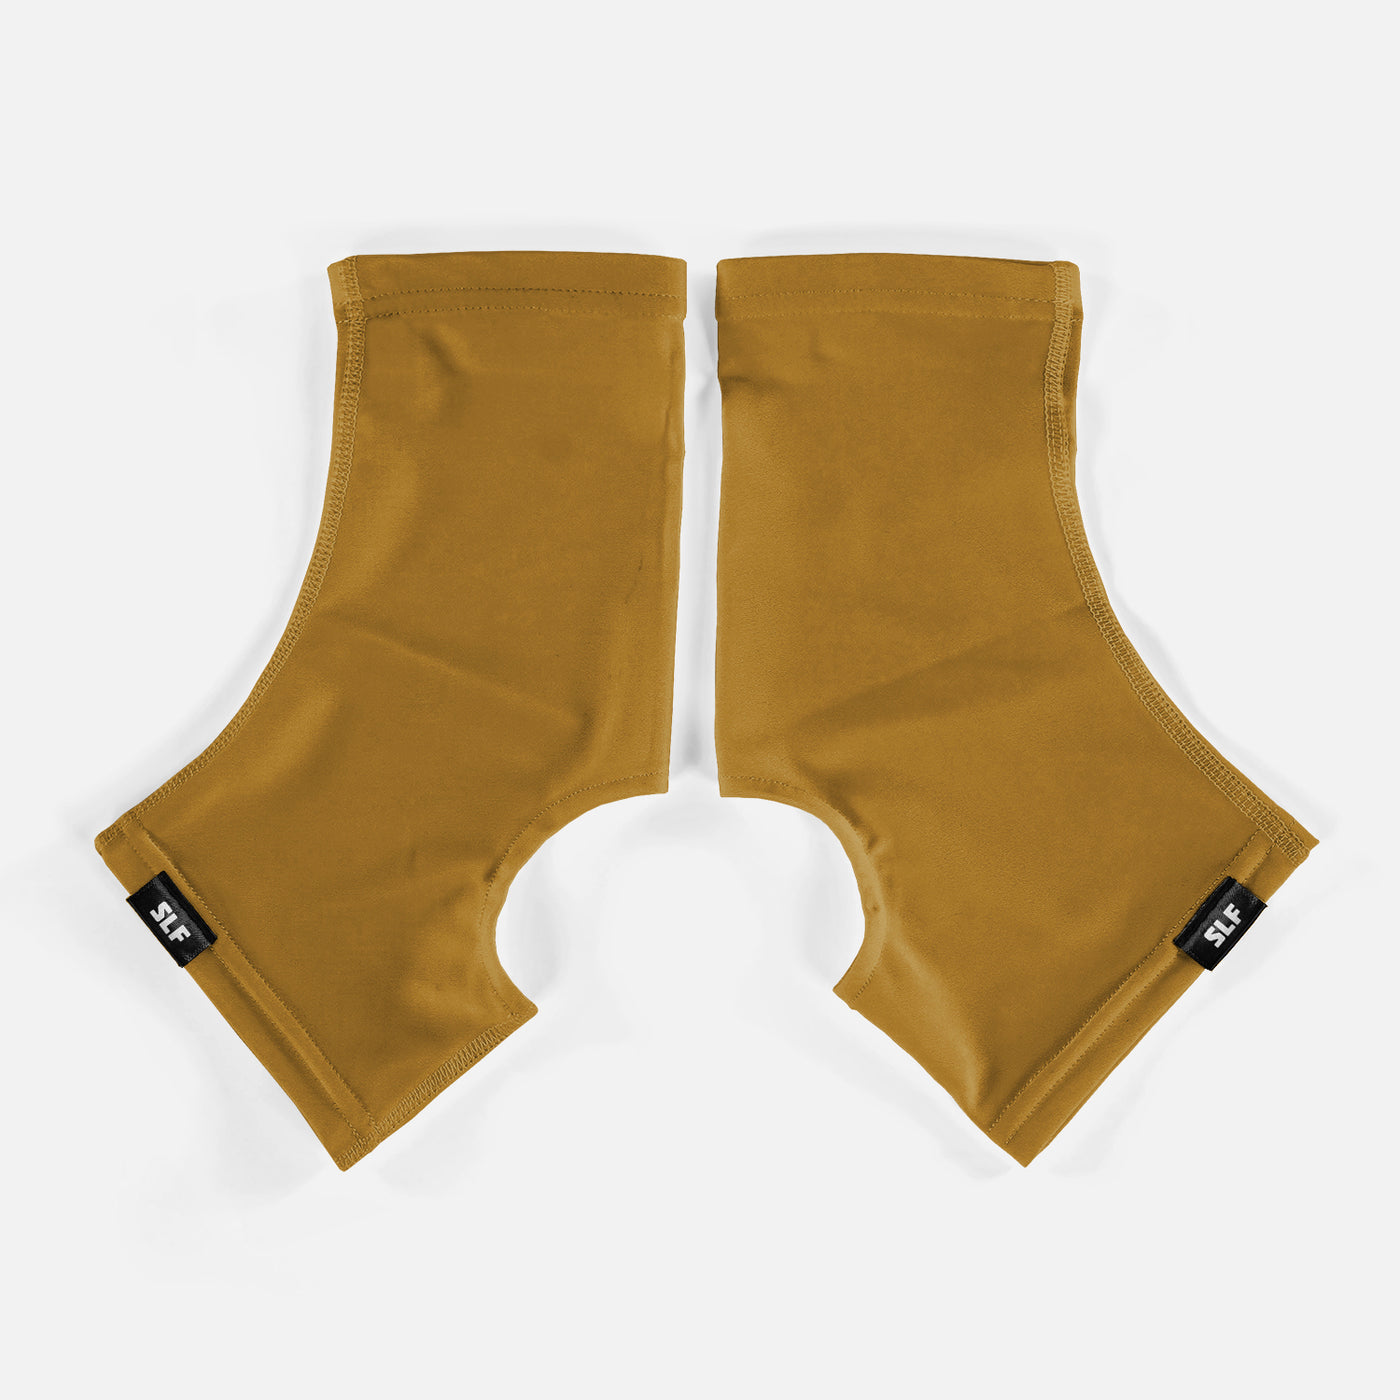 Hue Gold Spats / Cleat Covers